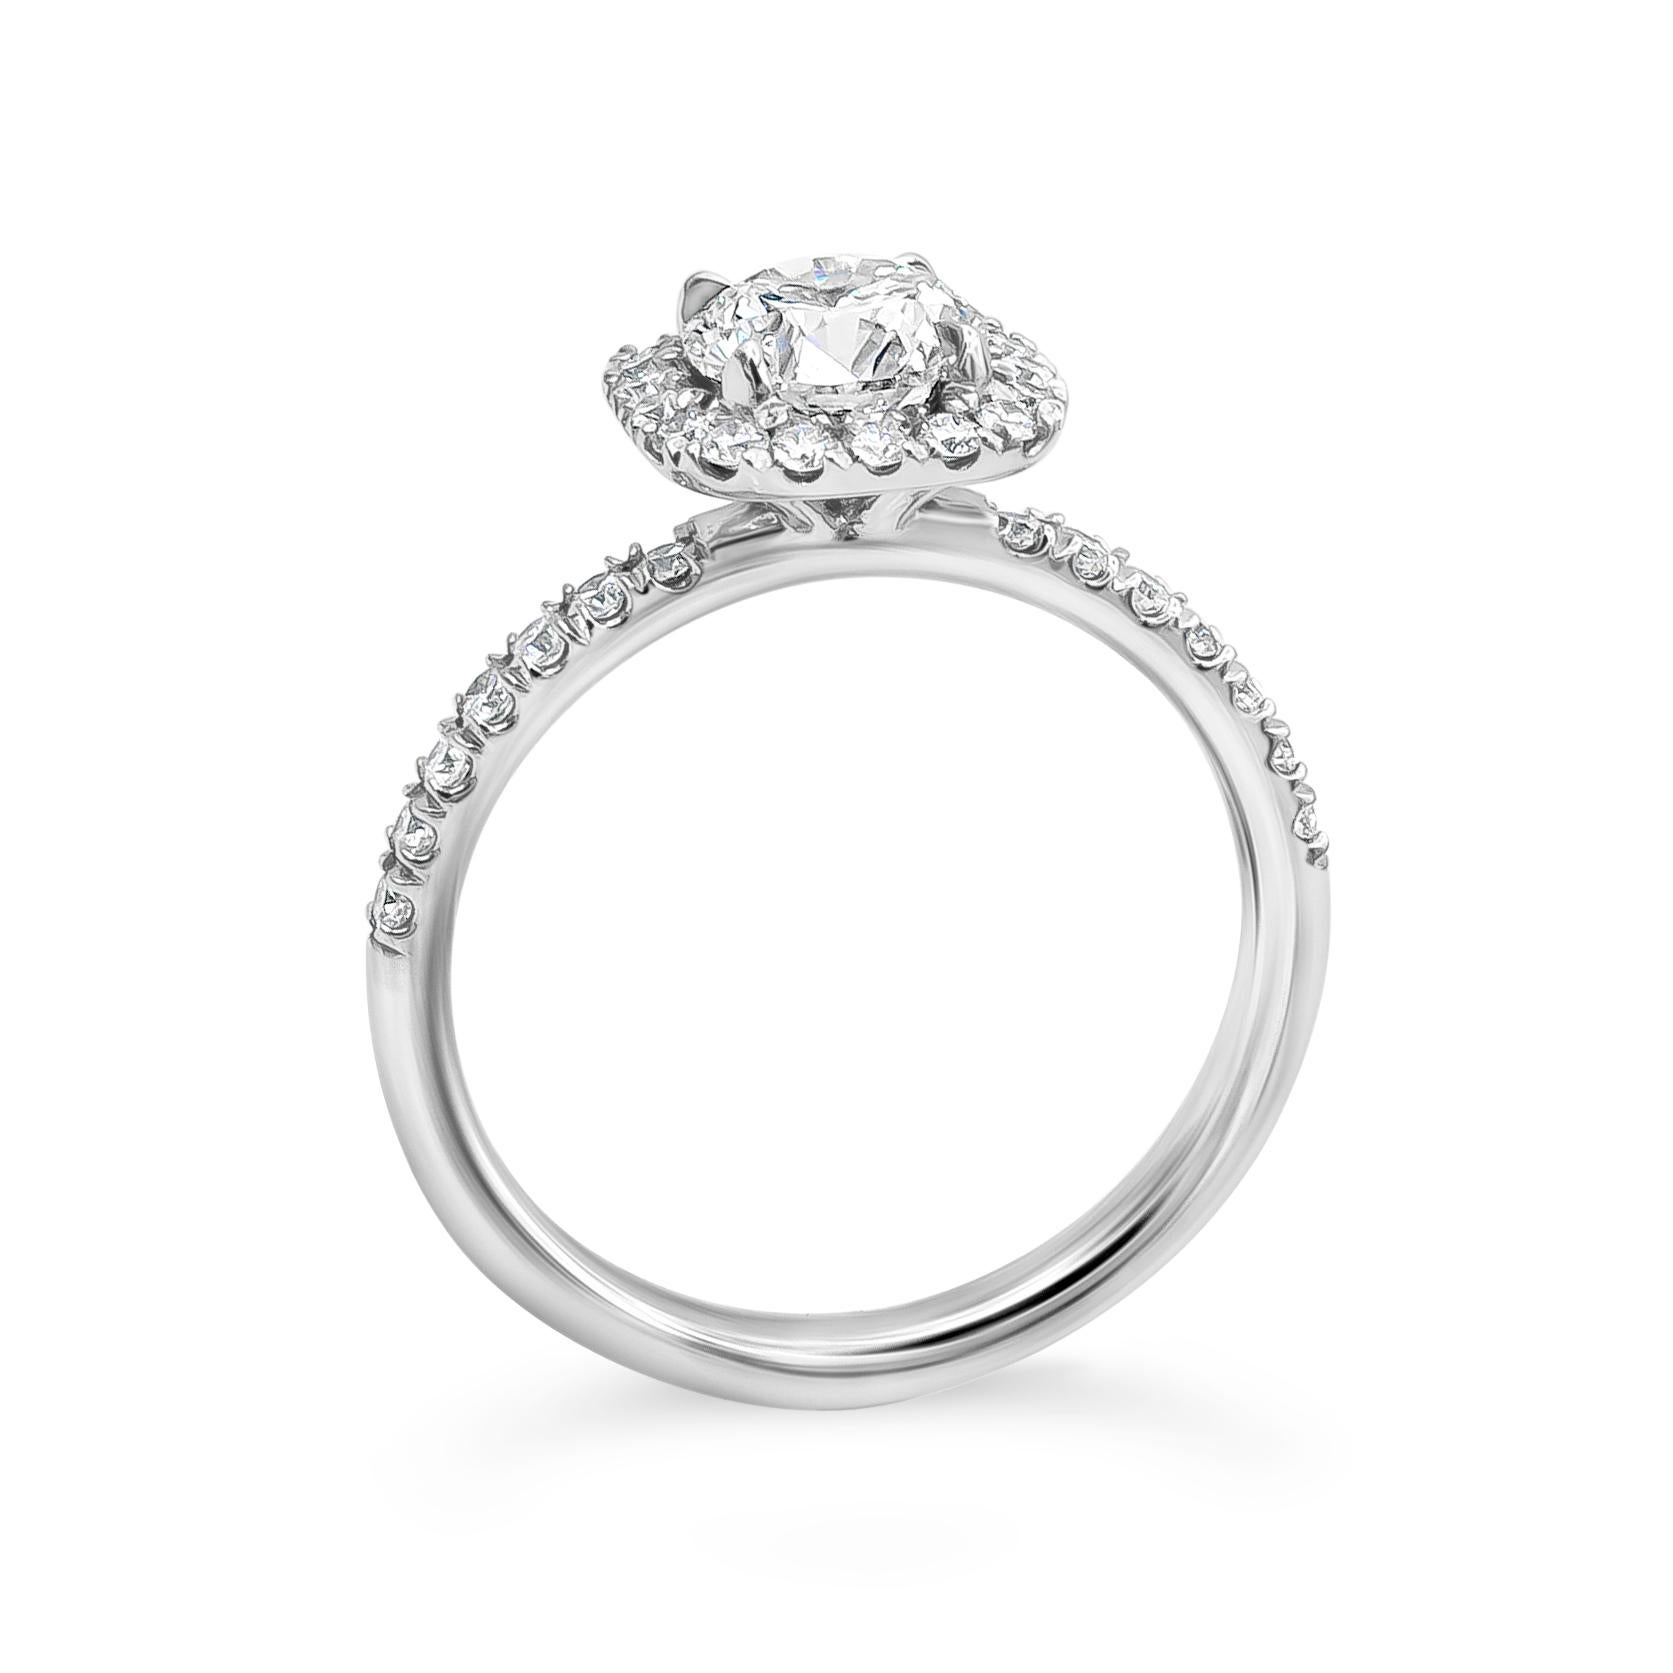 A well-crafted engagement ring style showcasing a 1.01 carats round brilliant diamond certified by GIA as F color, SI2 in clarity. Surrounded by round brilliant diamonds in a halo setting. Shank made in platinum is encrusted with diamonds set in a